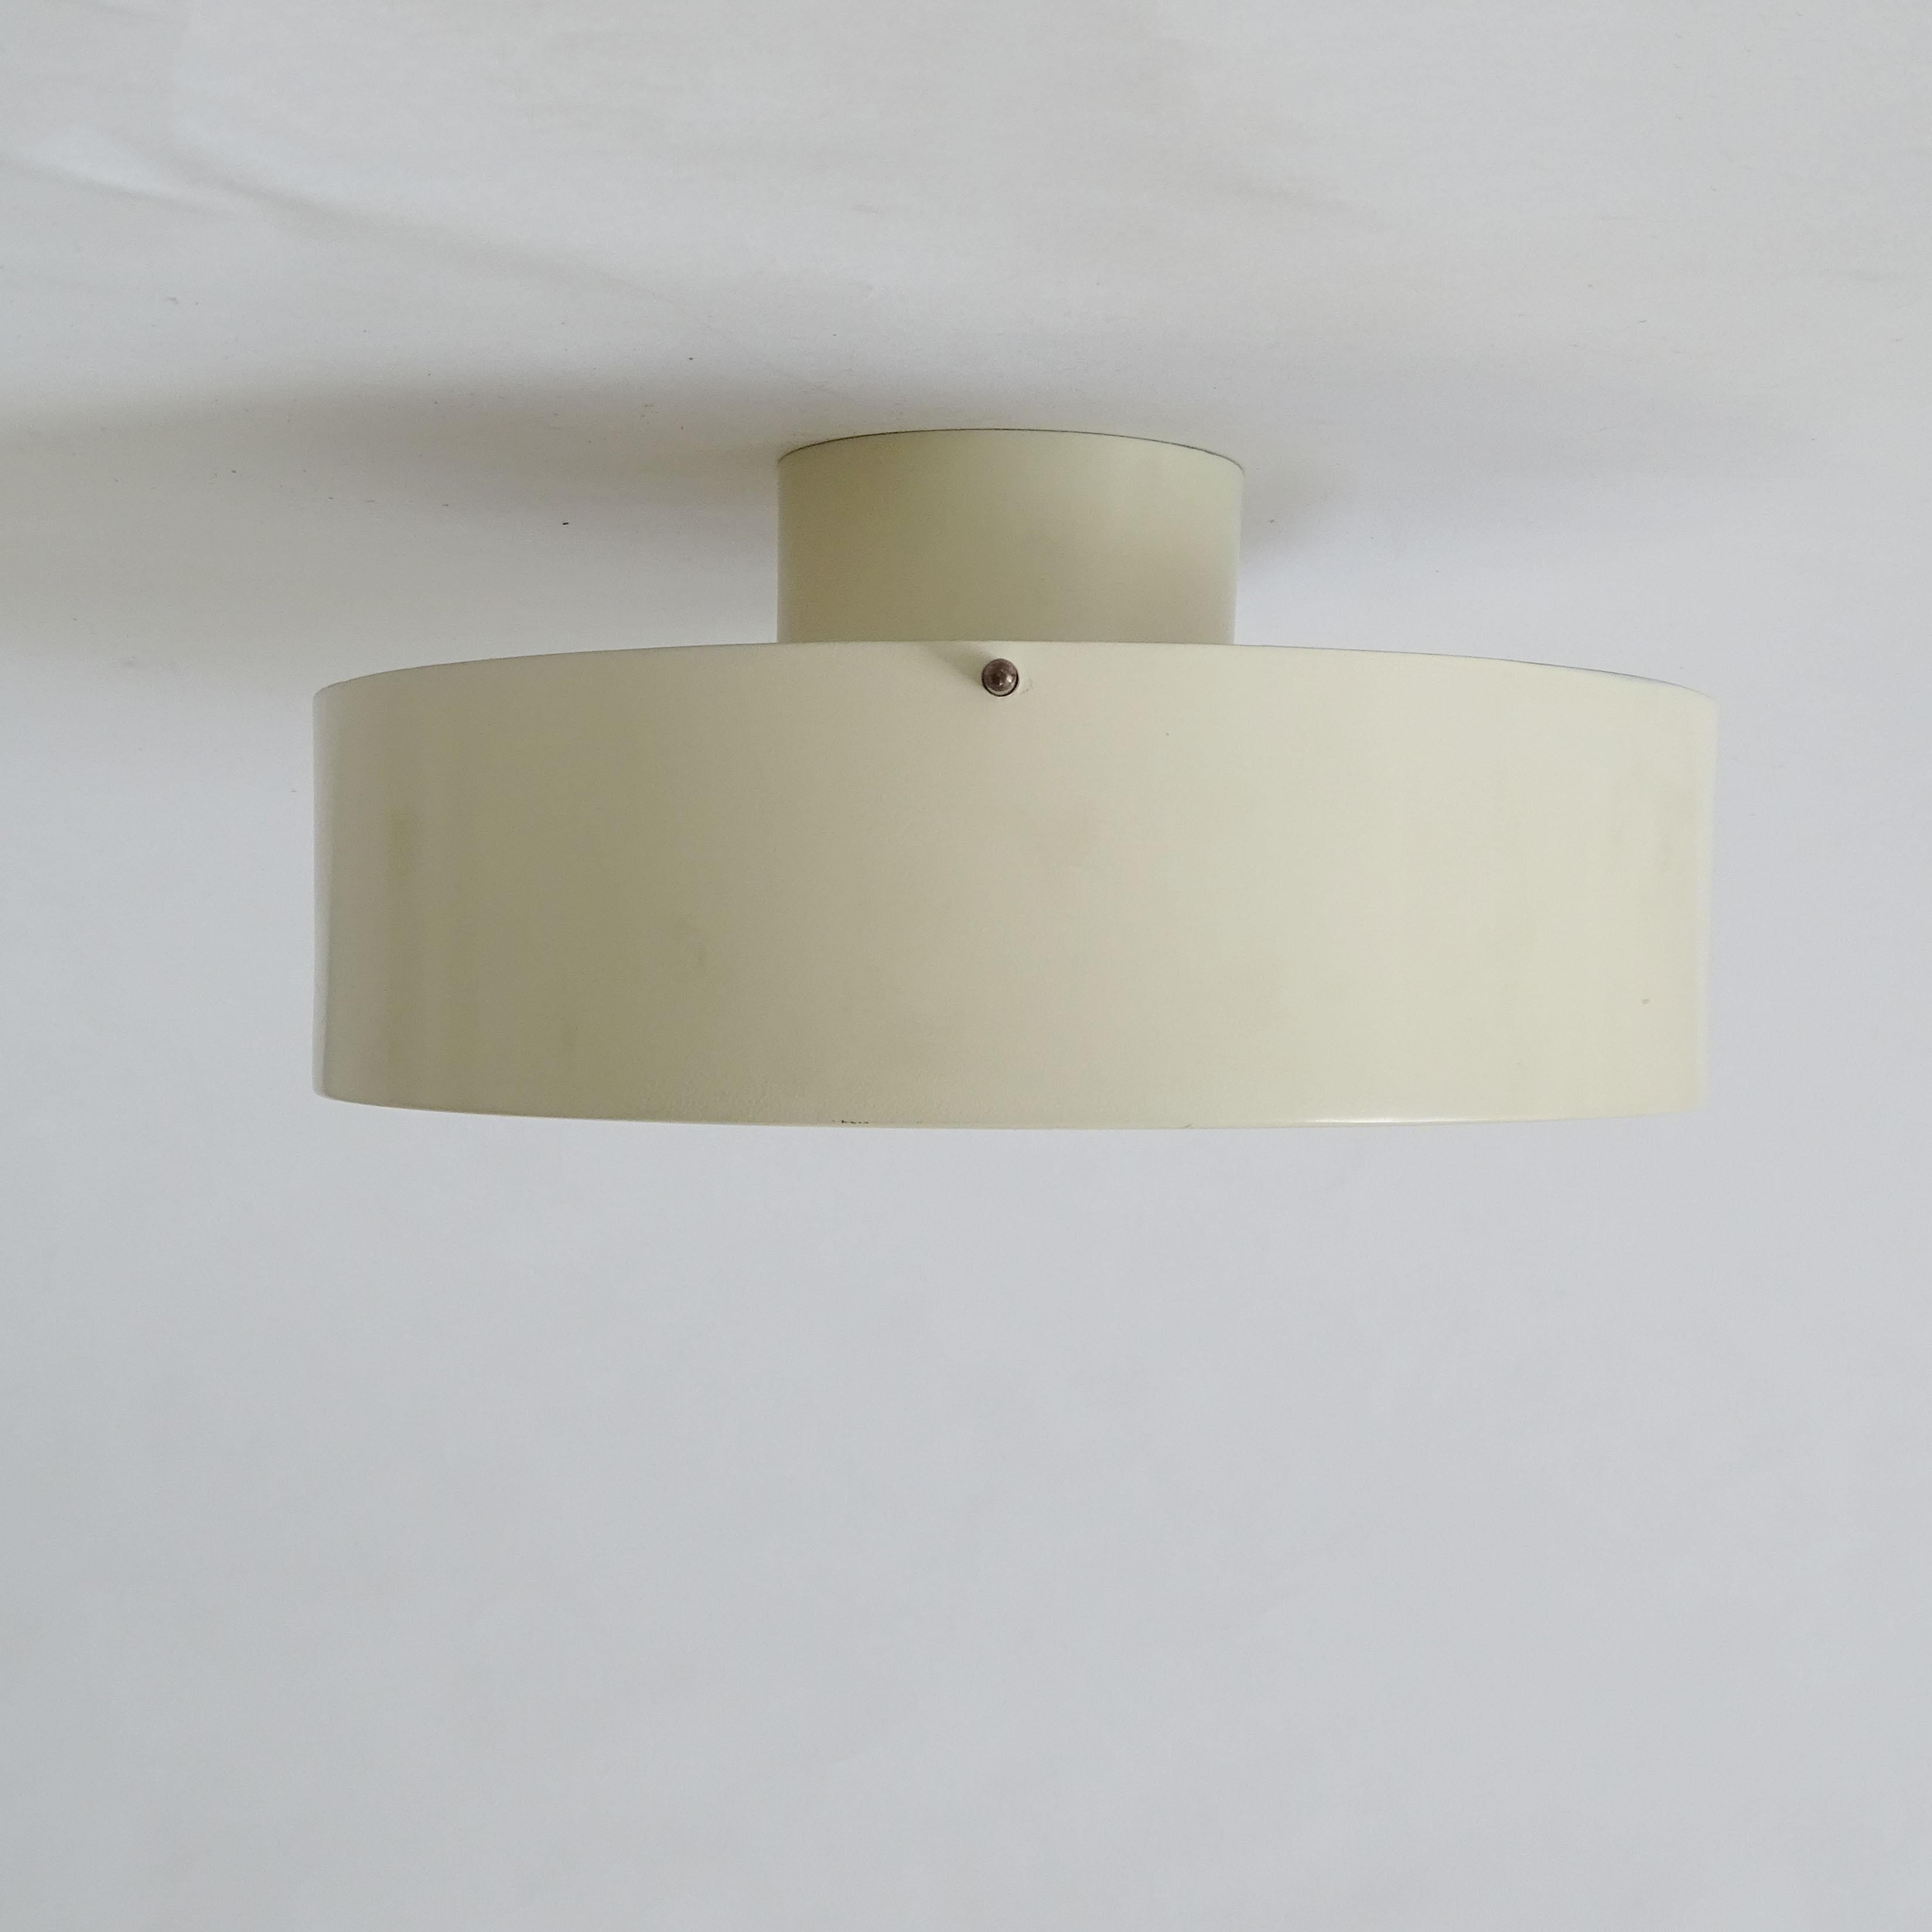 Cream flush mount ceiling lamp model: 450 by Tito Agnoli for Oluce, 
Italy 1960s
Reference: O-luce Thomas Brauniger 
Luminaires Moderniste
Berlin 2015 p. 117.